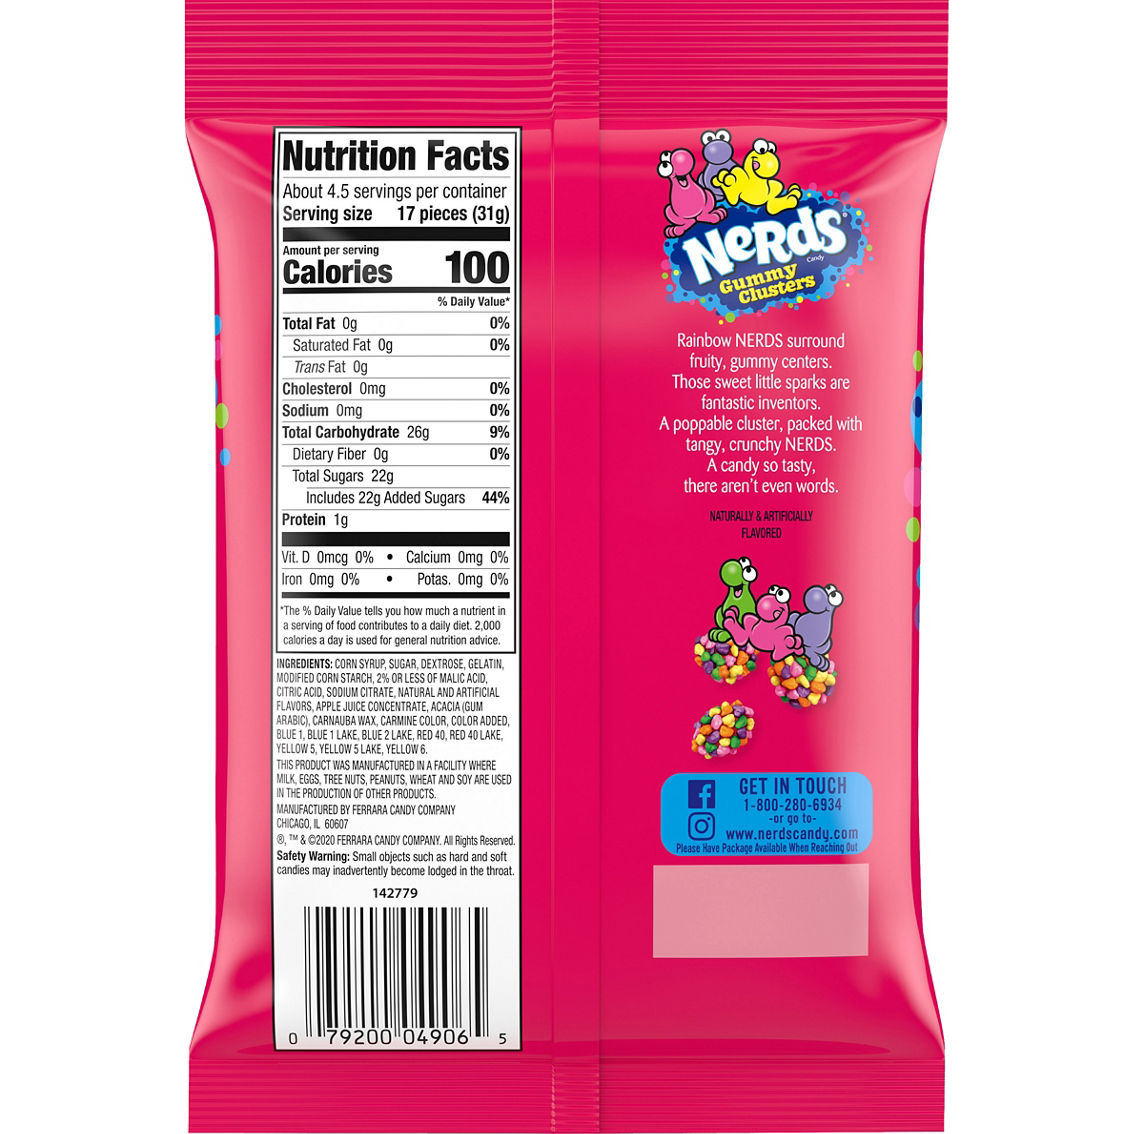 Nerds Gummy Clusters 5 oz. - Image 2 of 3